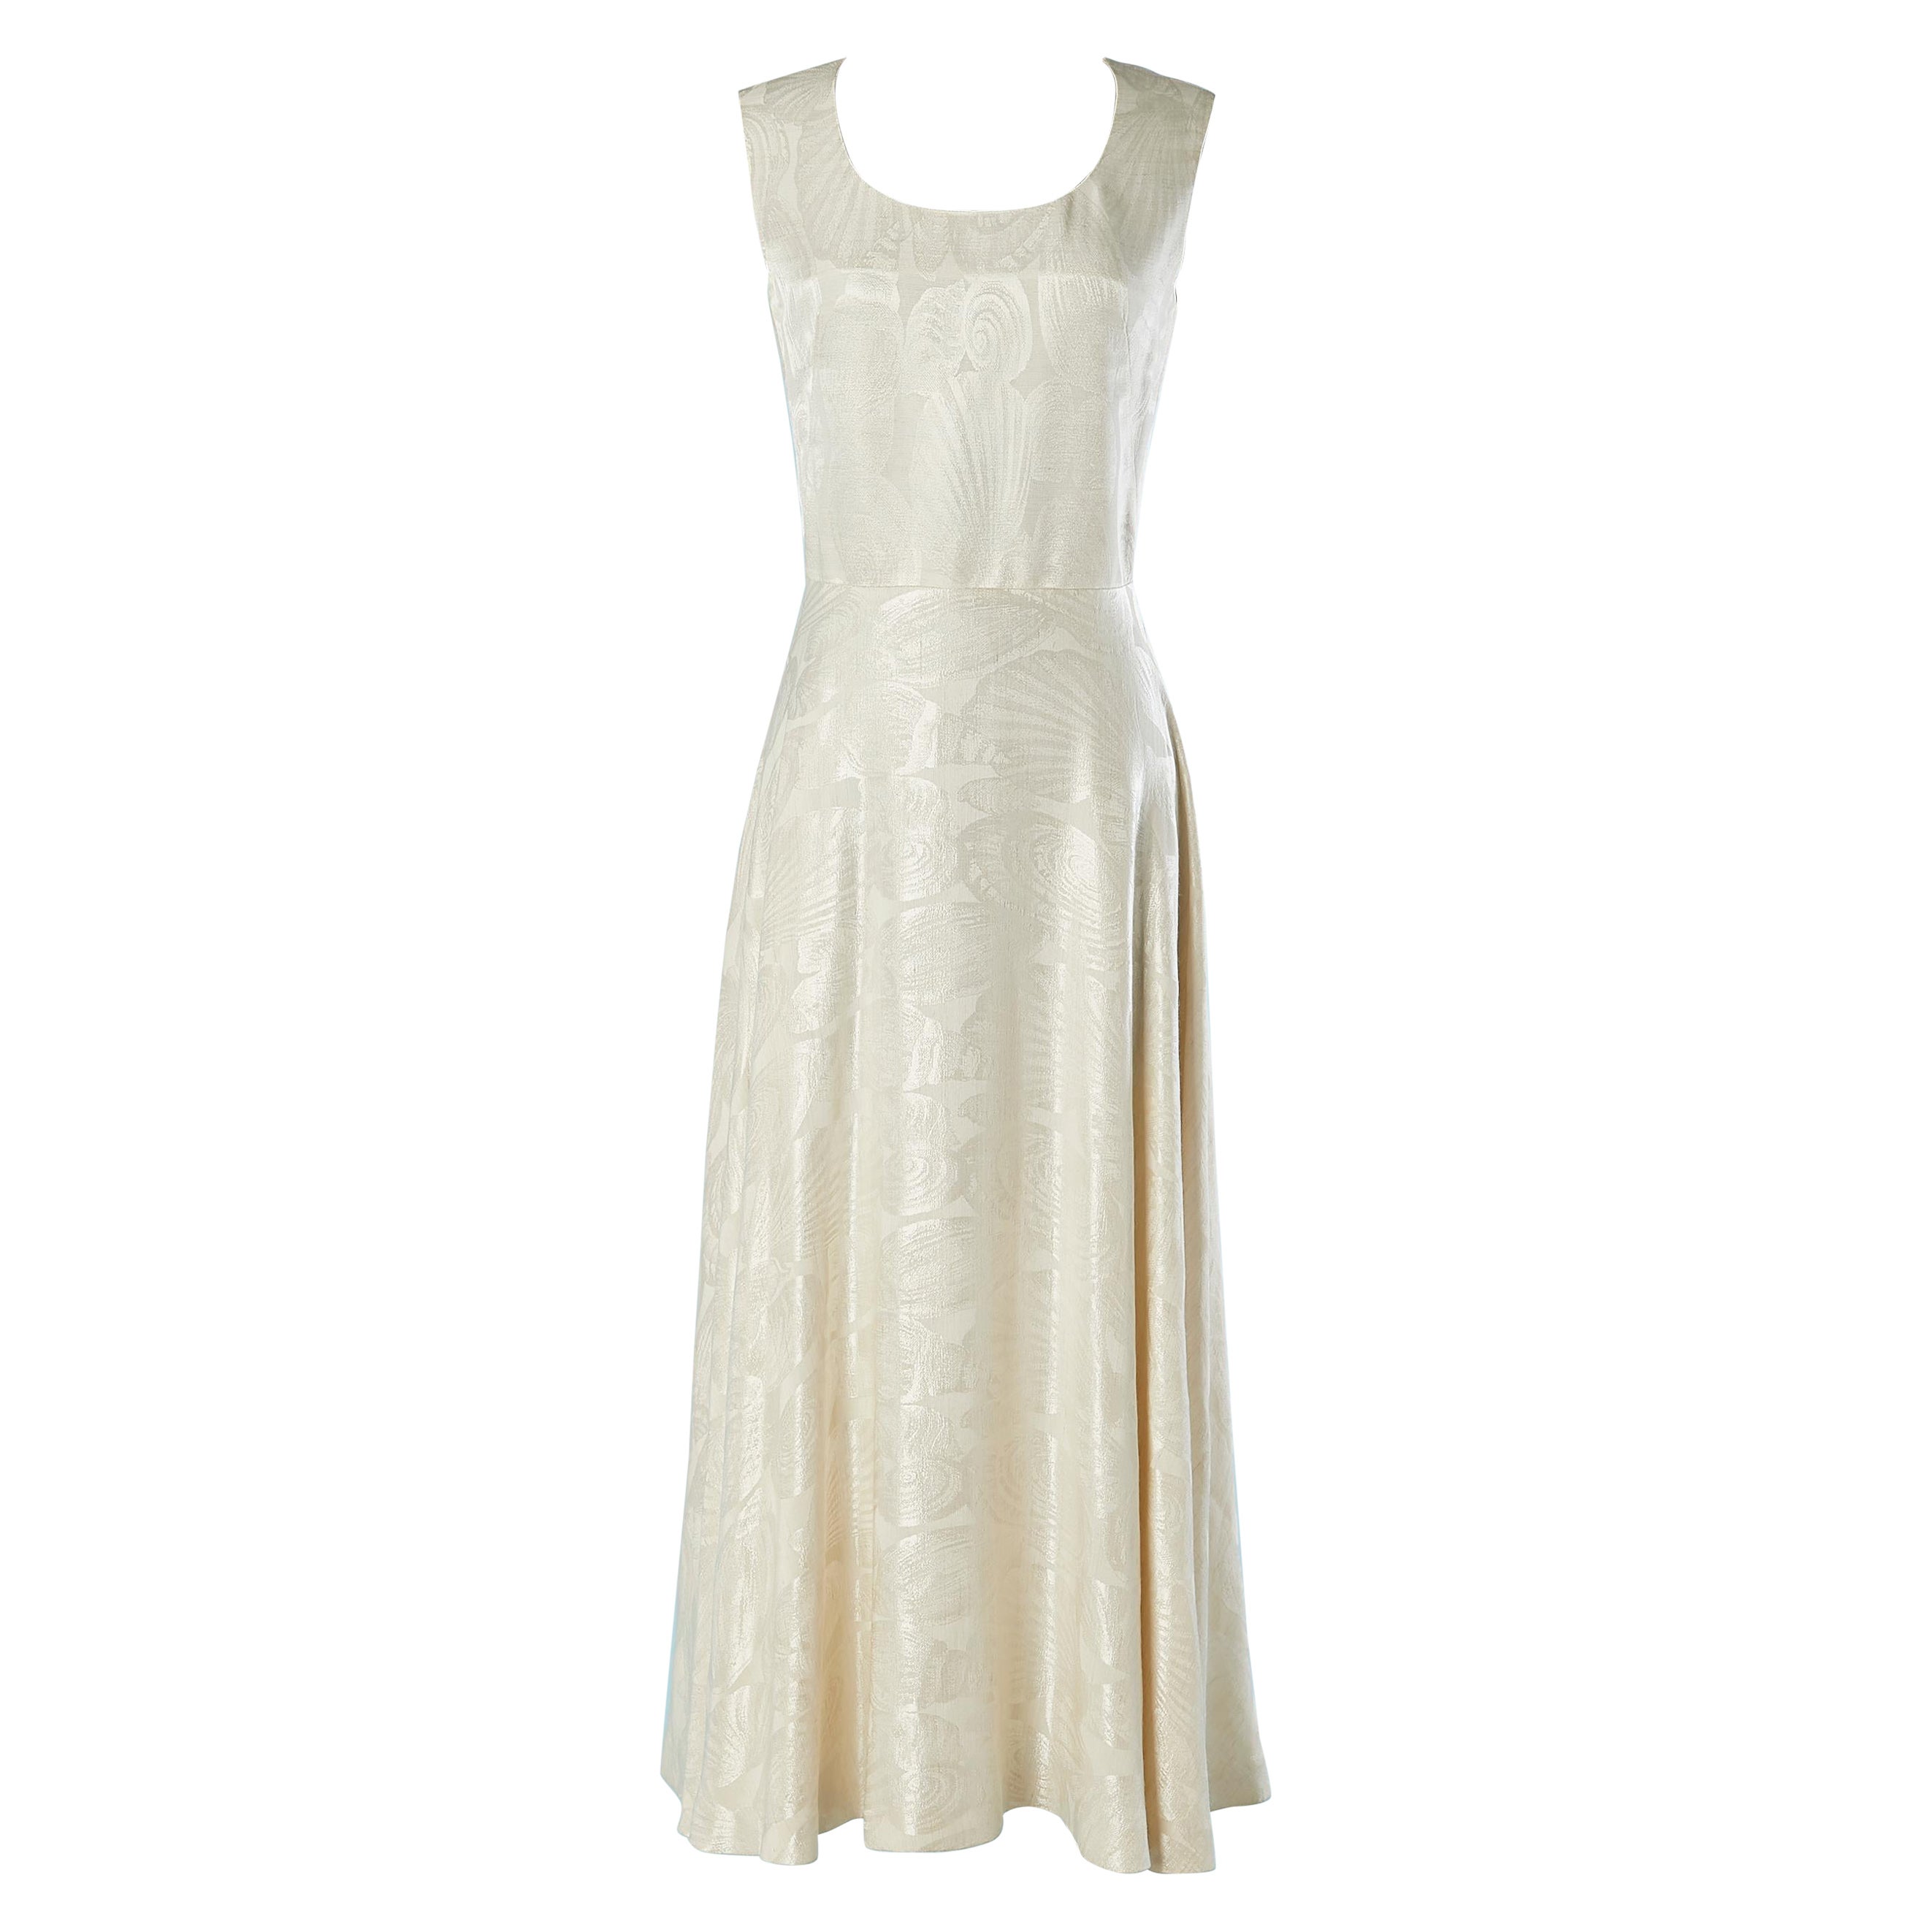 White sleeveless silk jacquard cocktail dress with shell pattern Grès Paris  For Sale